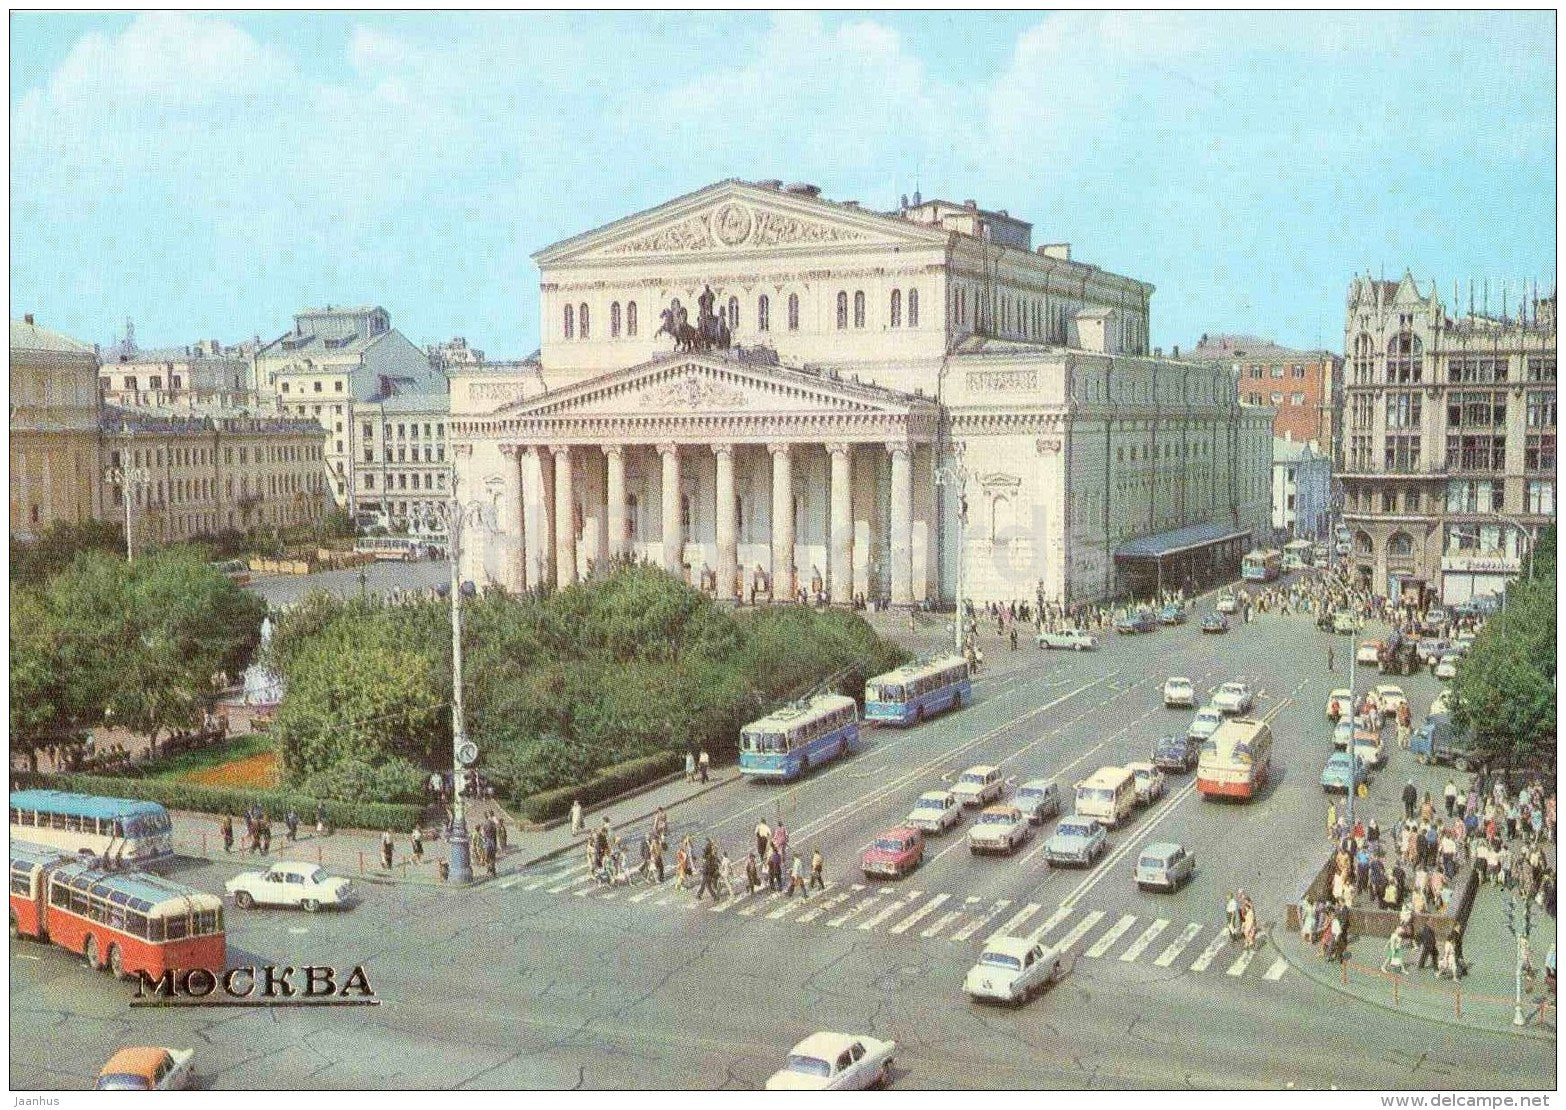 The State Academic Bolshoi Theatre - trolleybus - Moscow - 1984 - Russia USSR - unused - JH Postcards